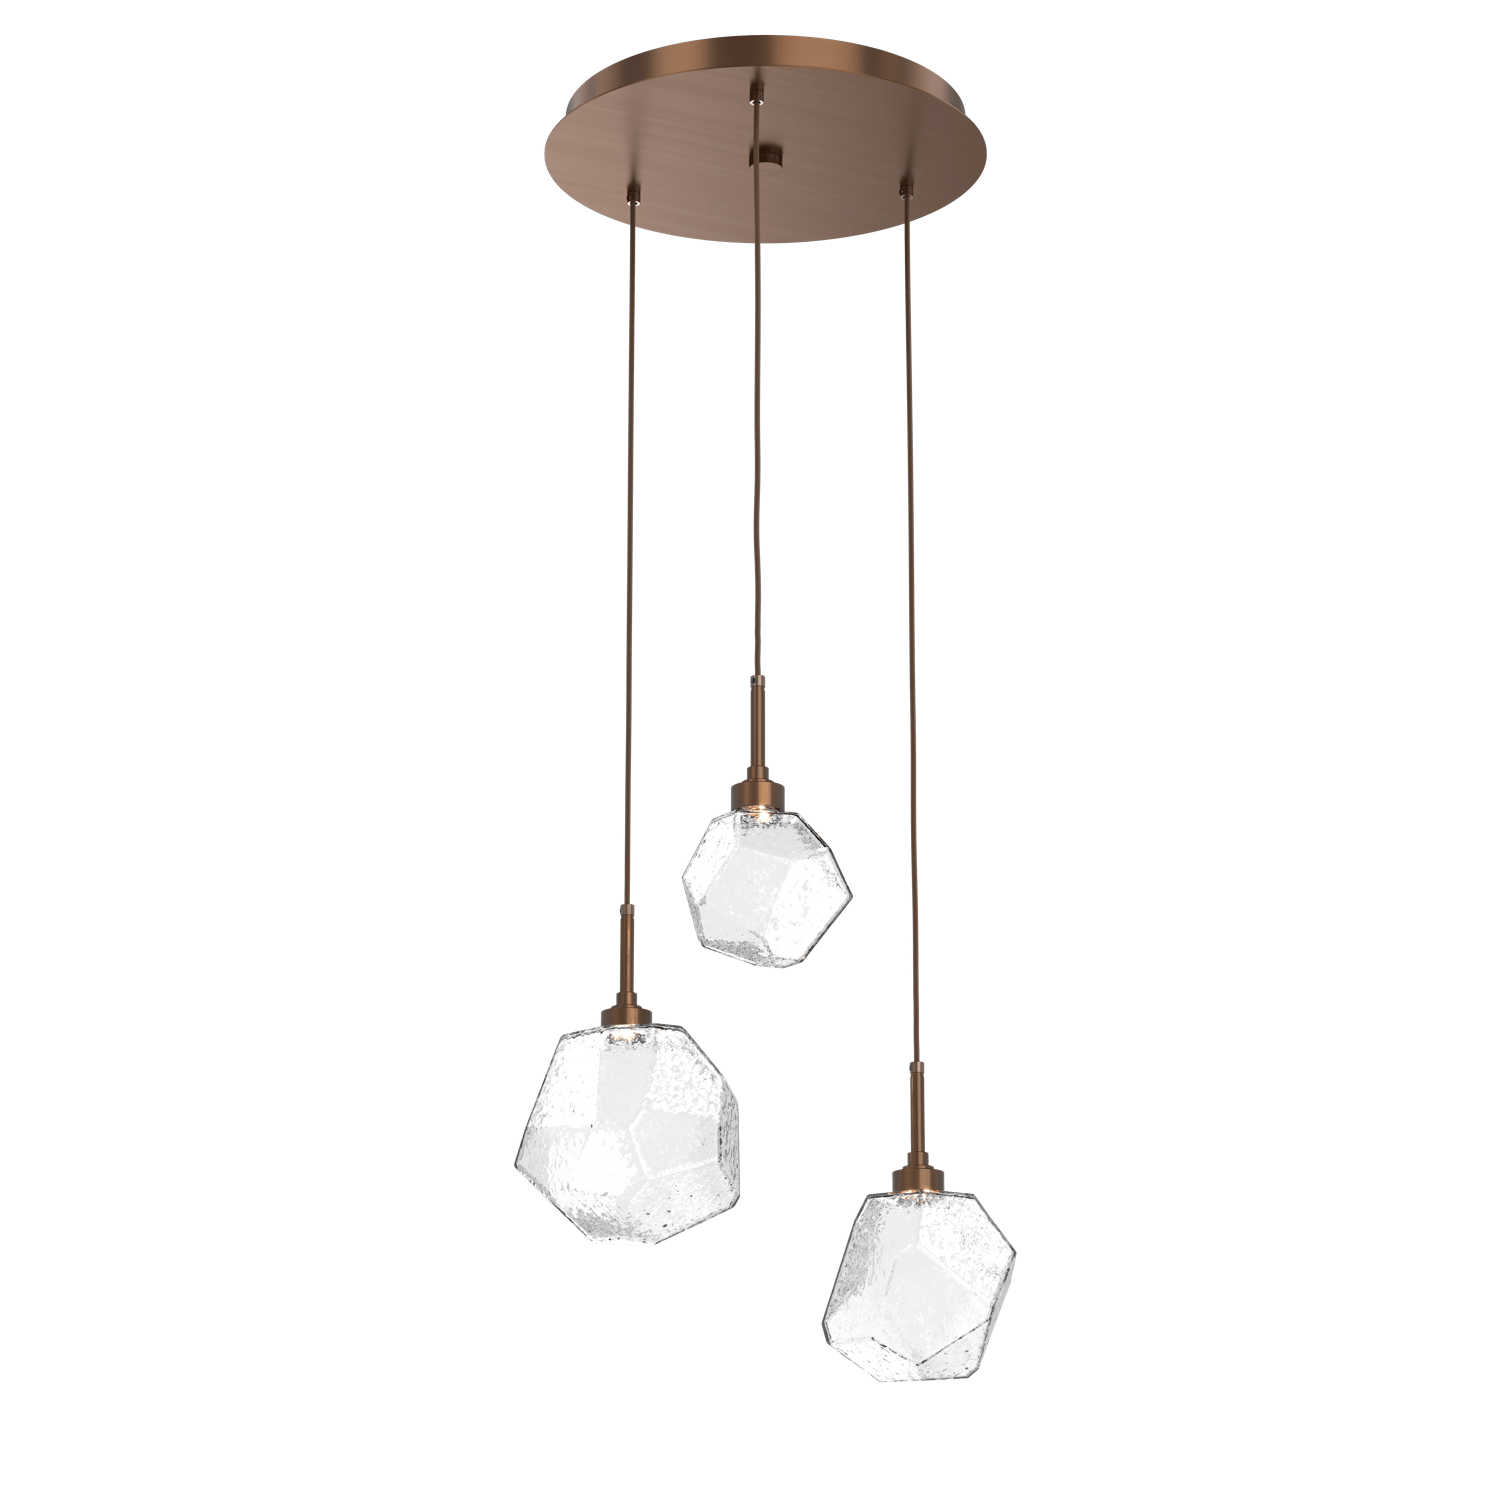 CHB0039-03-RB-C-Hammerton-Studio-Gem-3-light-round-pendant-chandelier-with-oil-rubbed-bronze-finish-and-clear-blown-glass-shades-and-LED-lamping